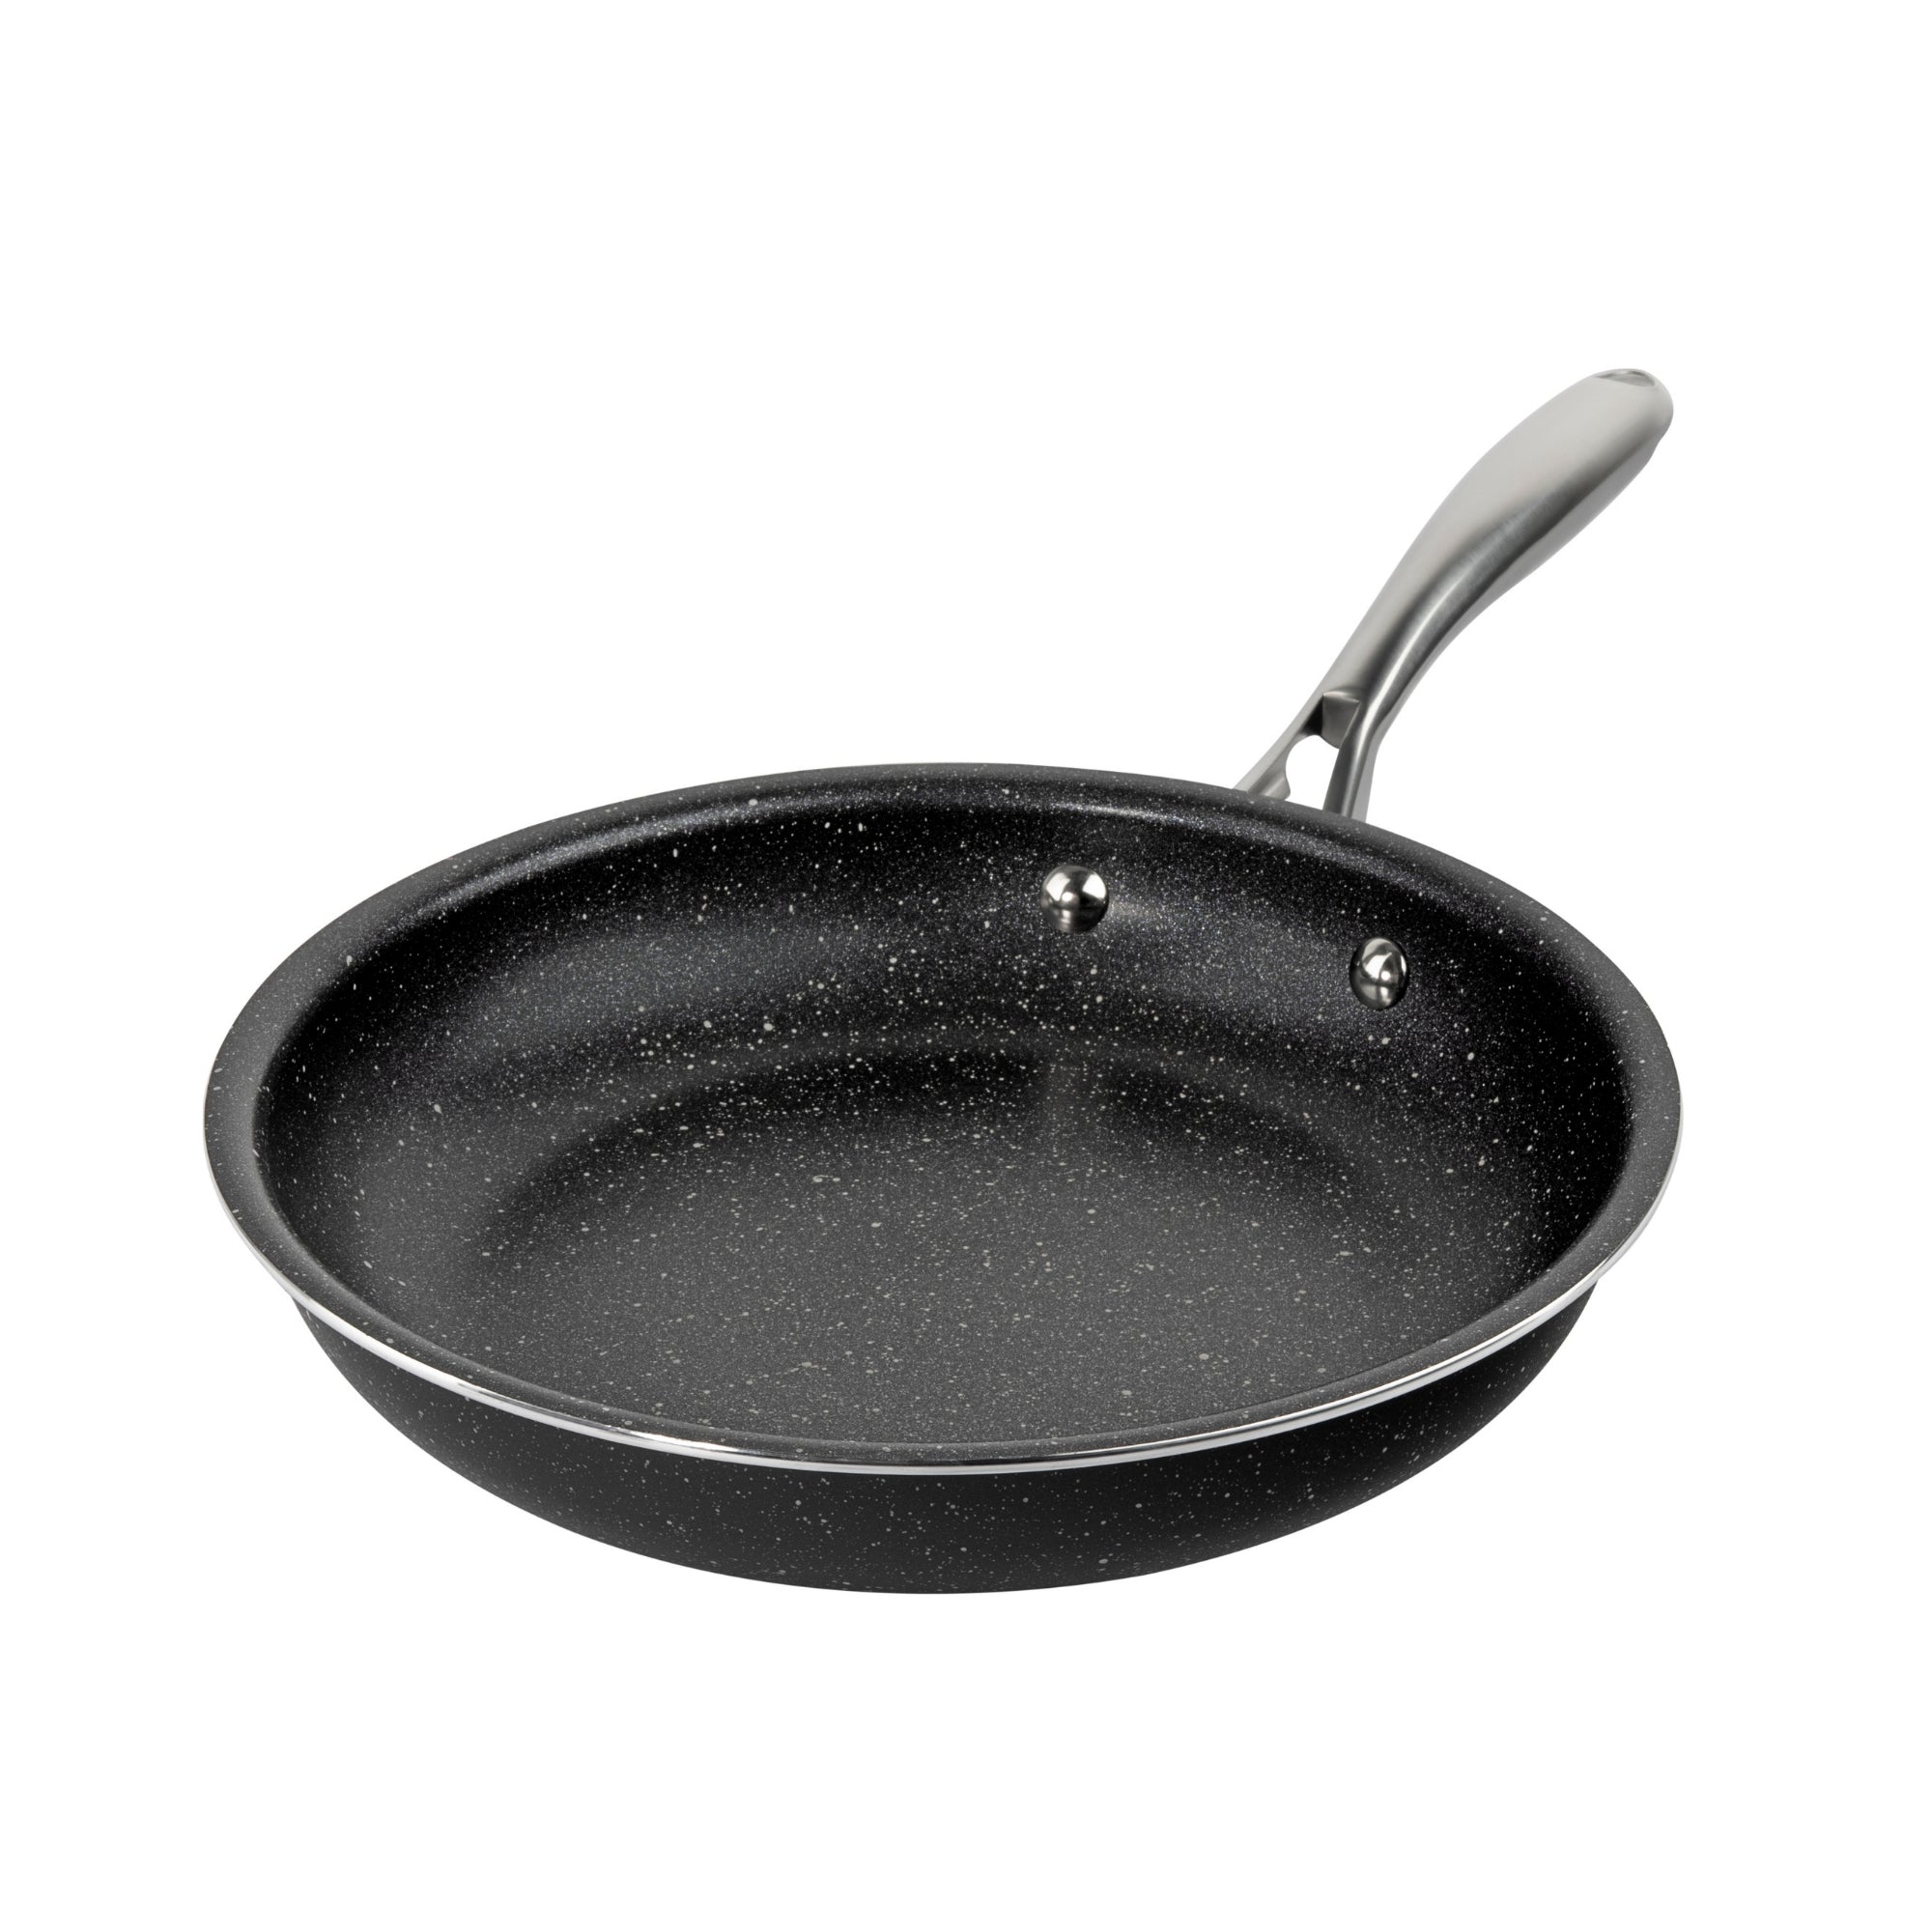 Emson GRANITESTONE 11 Inch Shallow Square Frying Pan Nonstick Skillet  Scratchproof Fry Pans Diamond Infused Coating